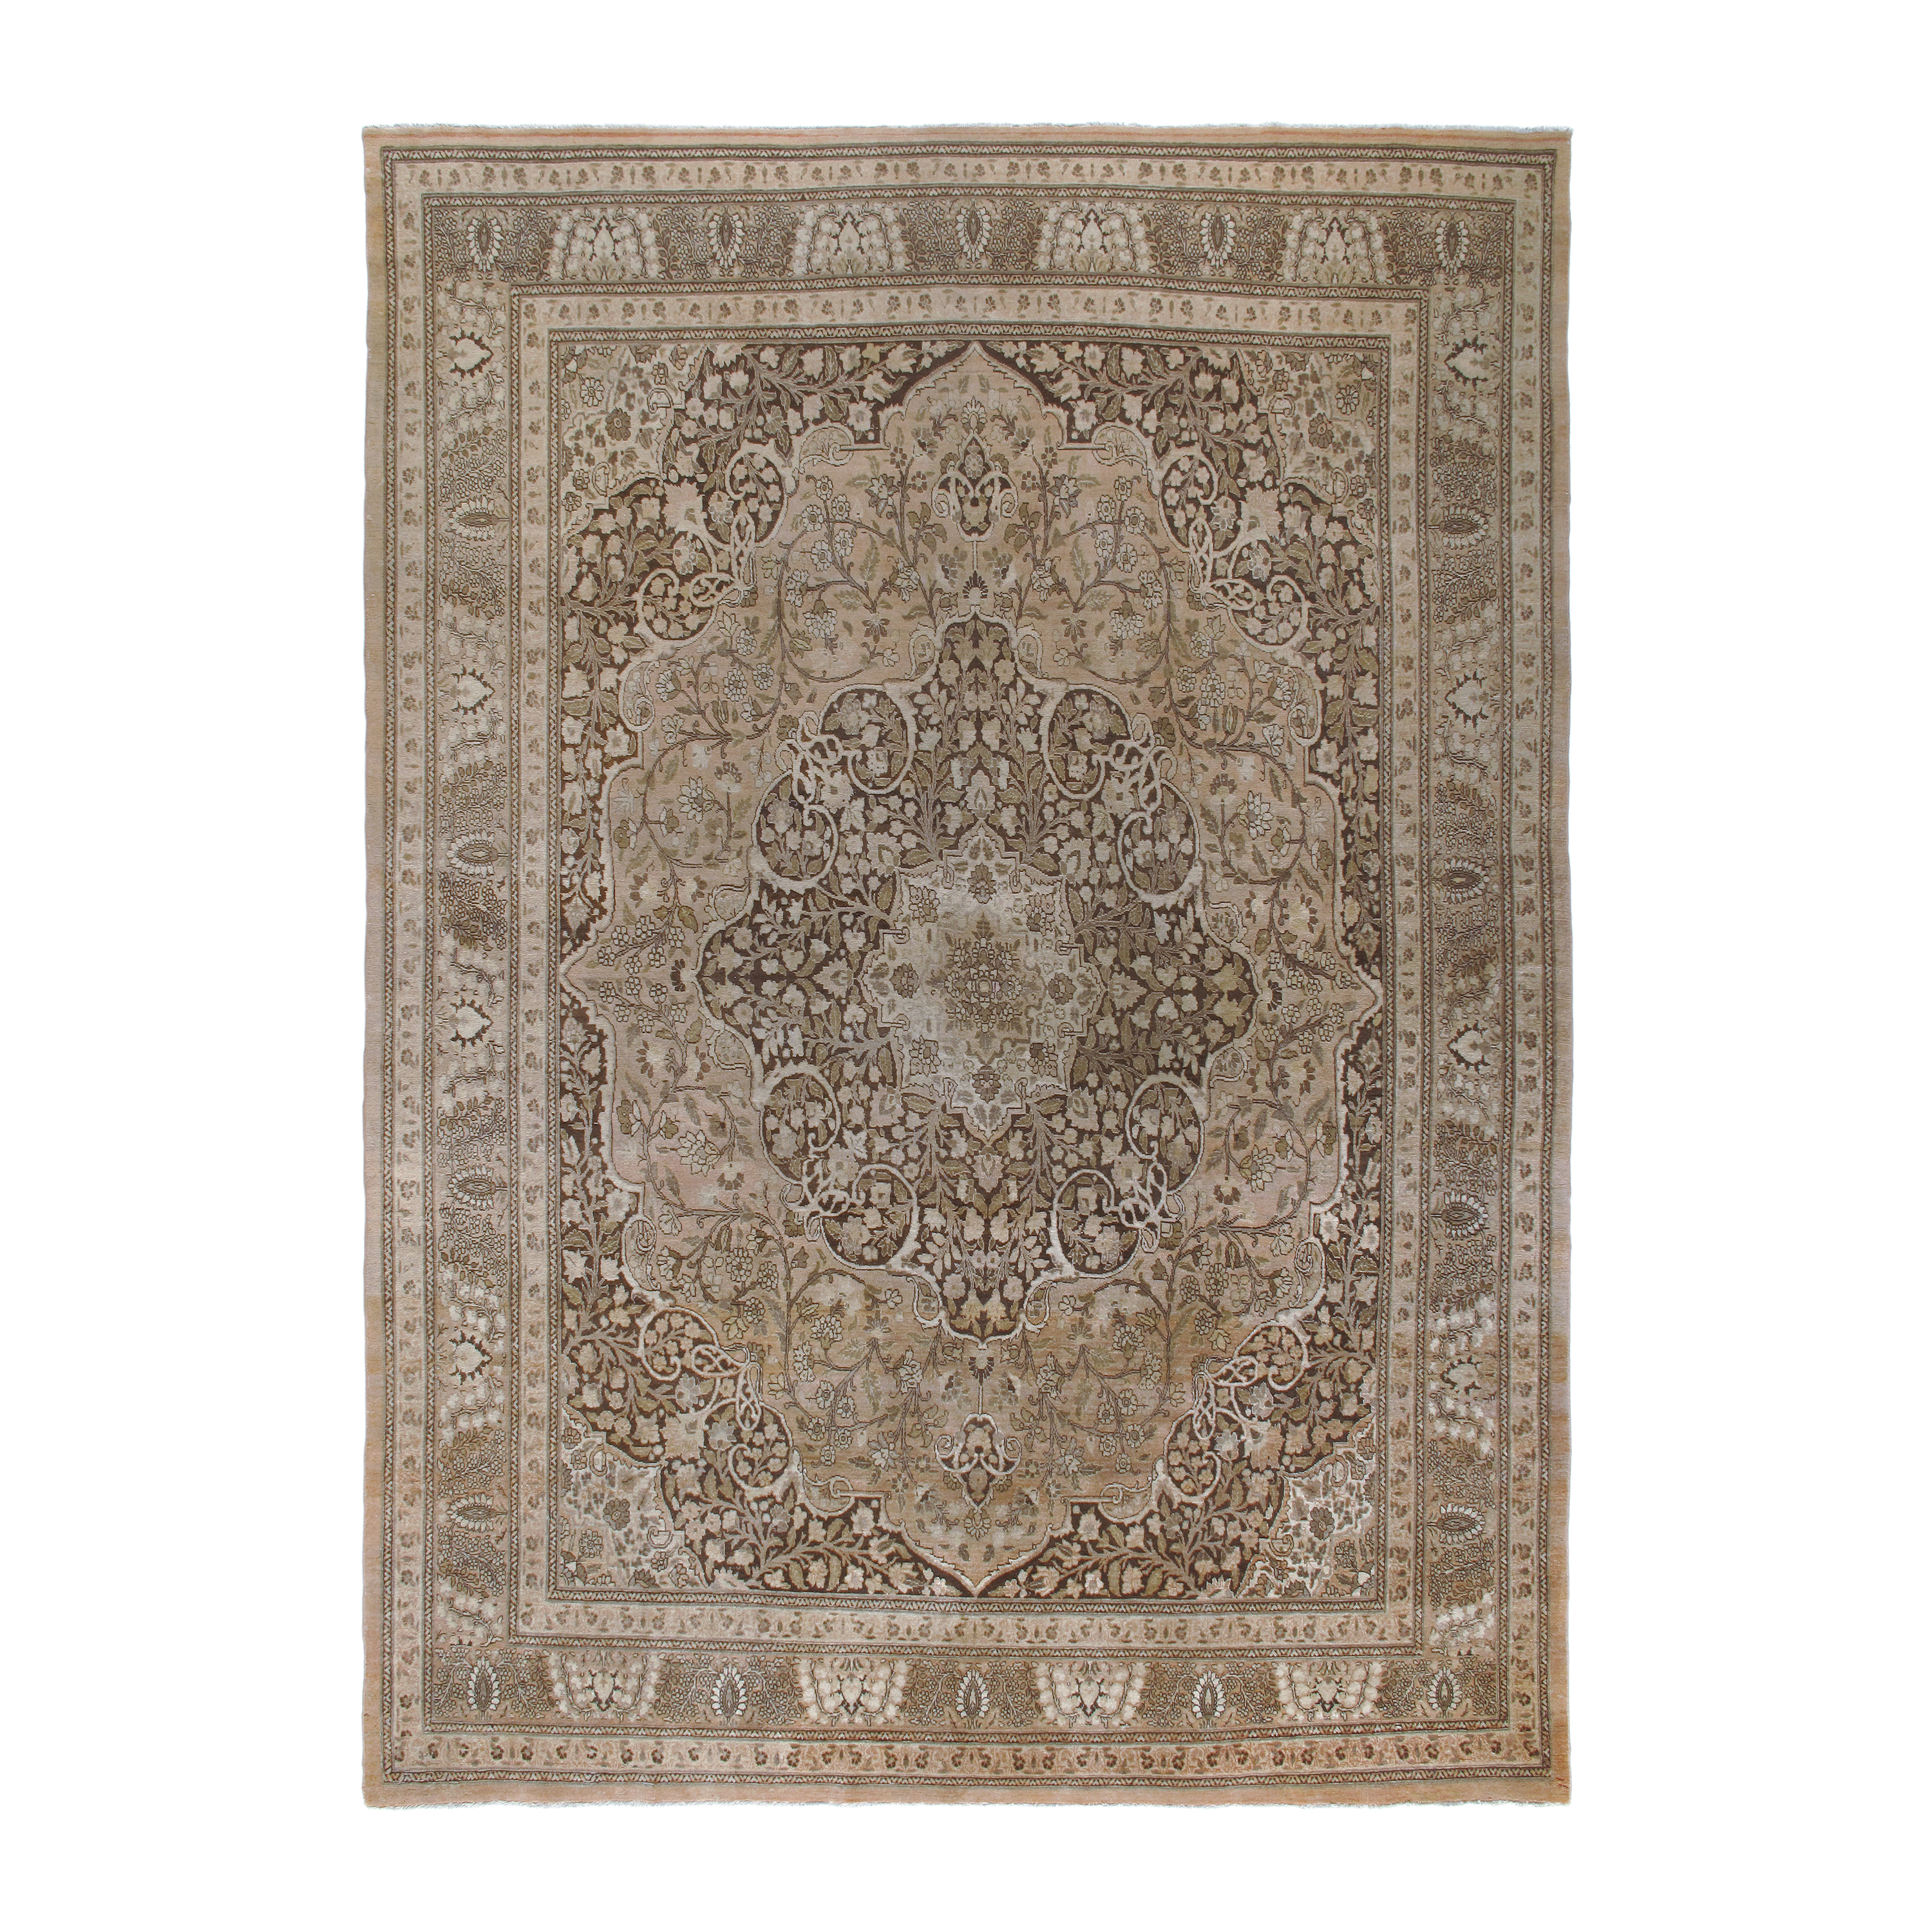 Tabriz Rug is an antique hand-knotted. 